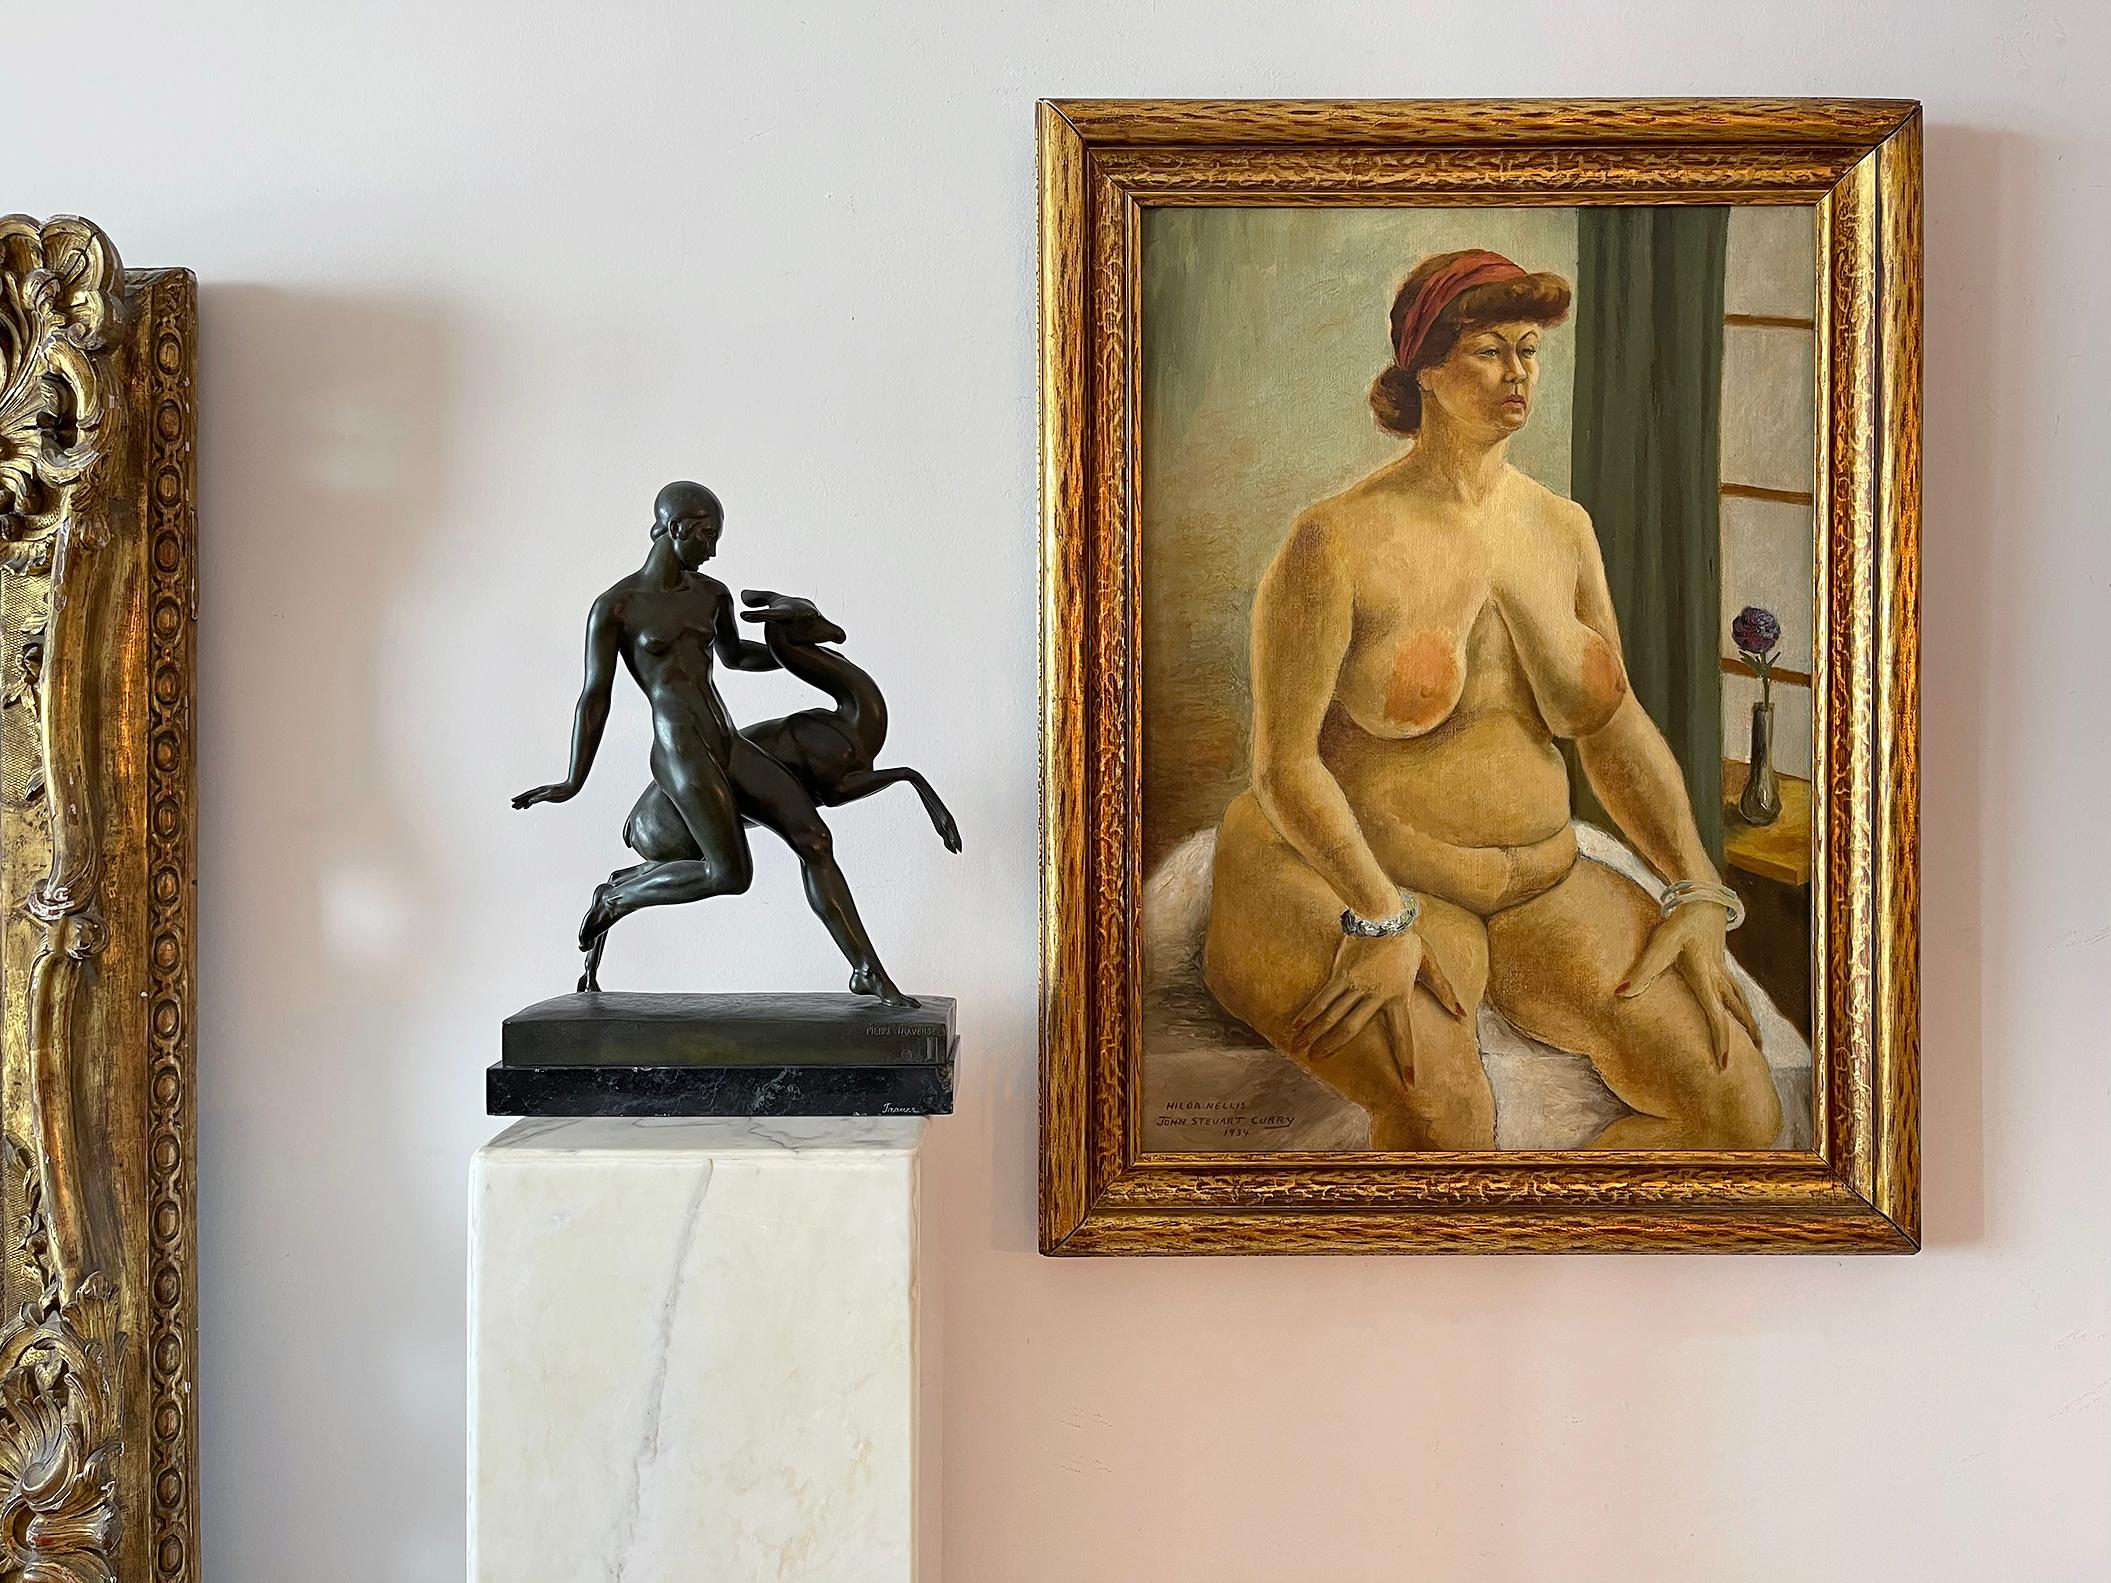  Plump or fleshy and voluptuous nude... you can describe it as you see it. Signed, titled and dated lower left: John Steuart Curry / 1934 